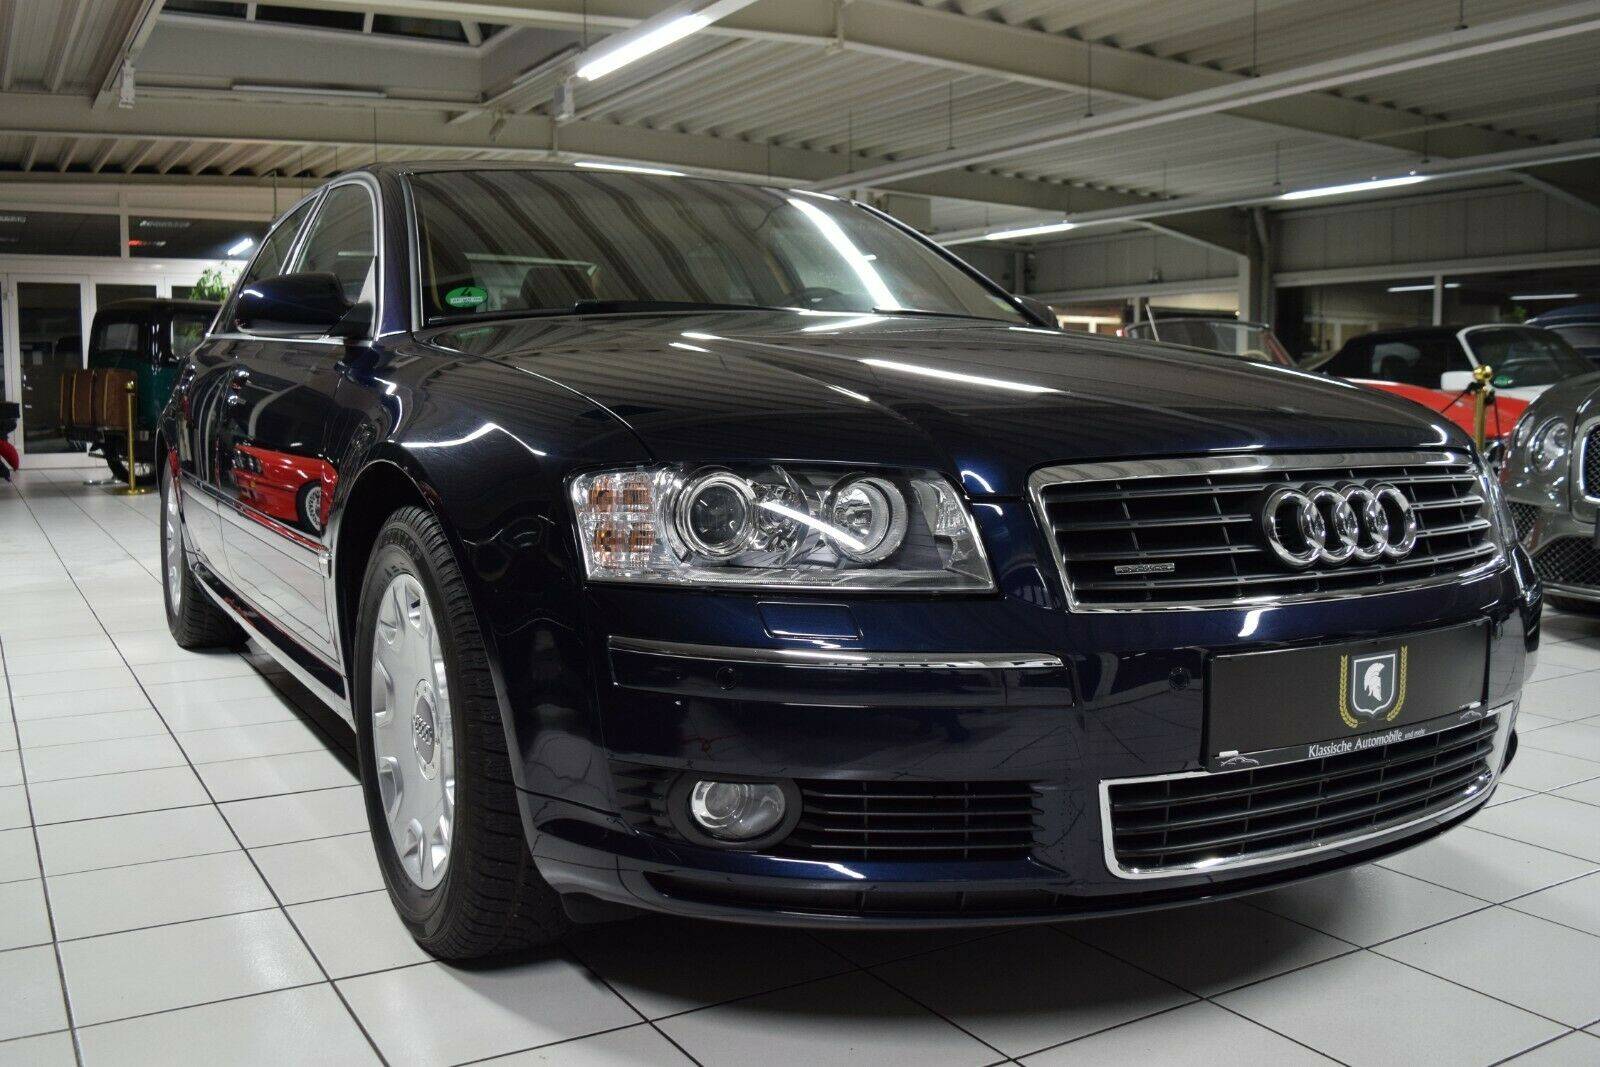 For Sale Audi A8 4 2 Quattro 03 Offered For Gbp 22 072